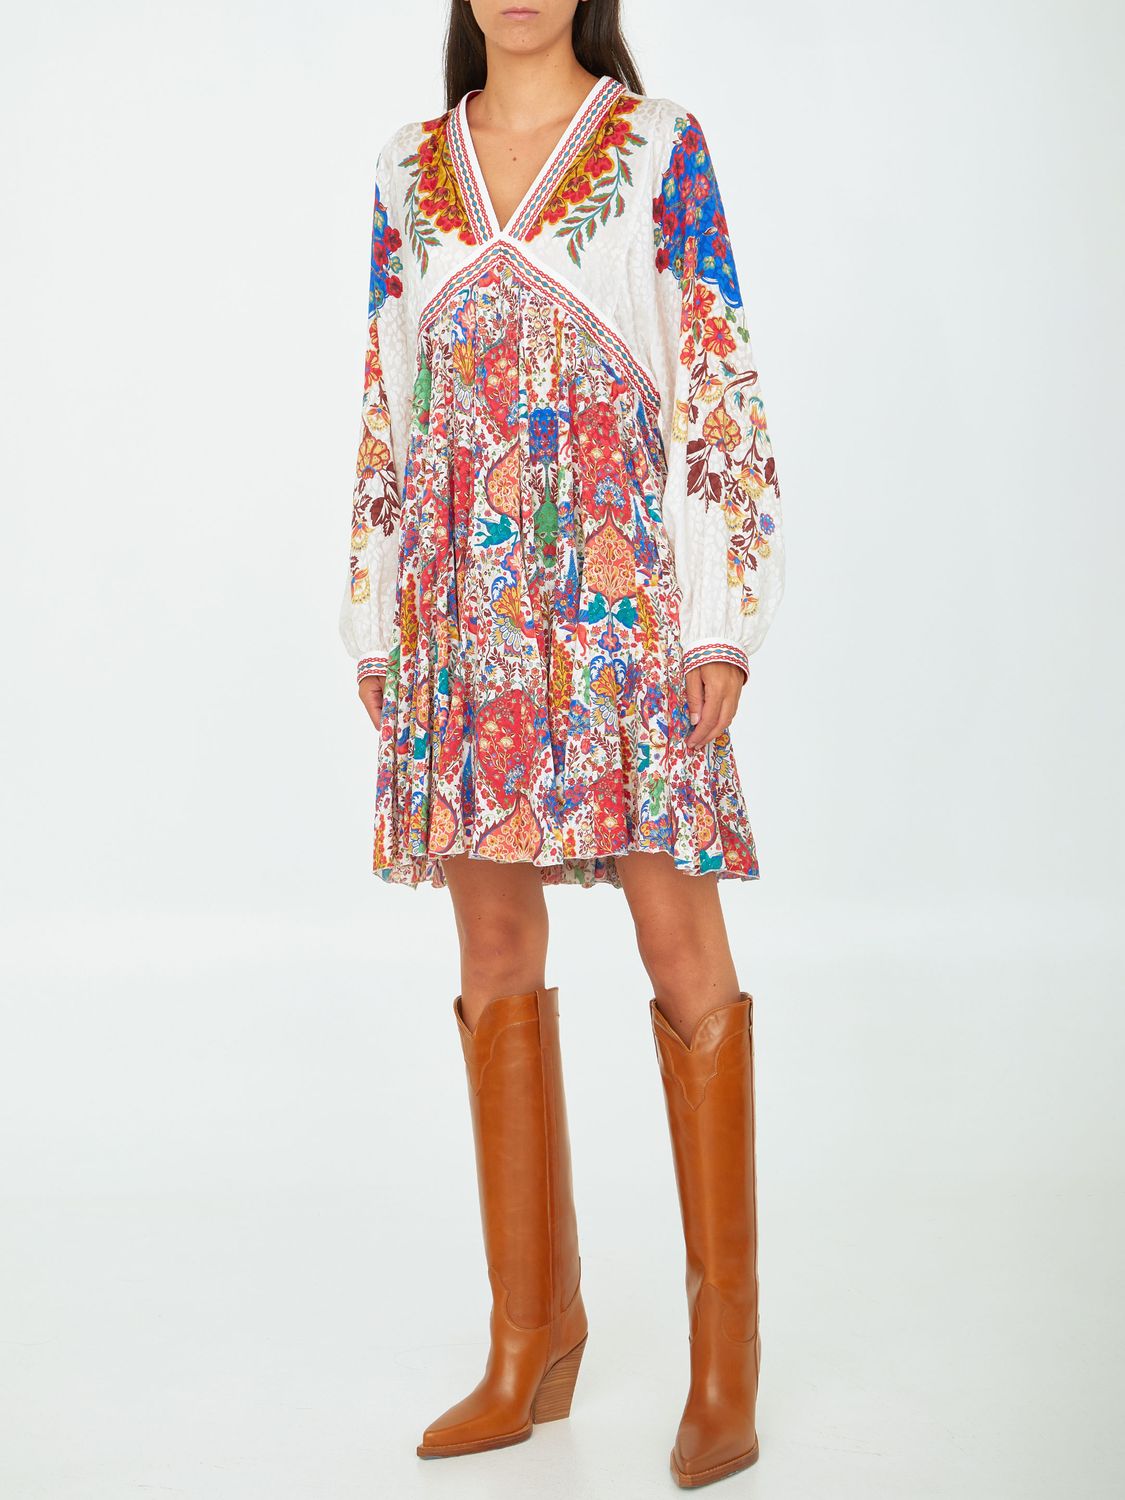 ETRO Paisley Print Silk Dress for Women with V-Neck and Relaxed Fit in White